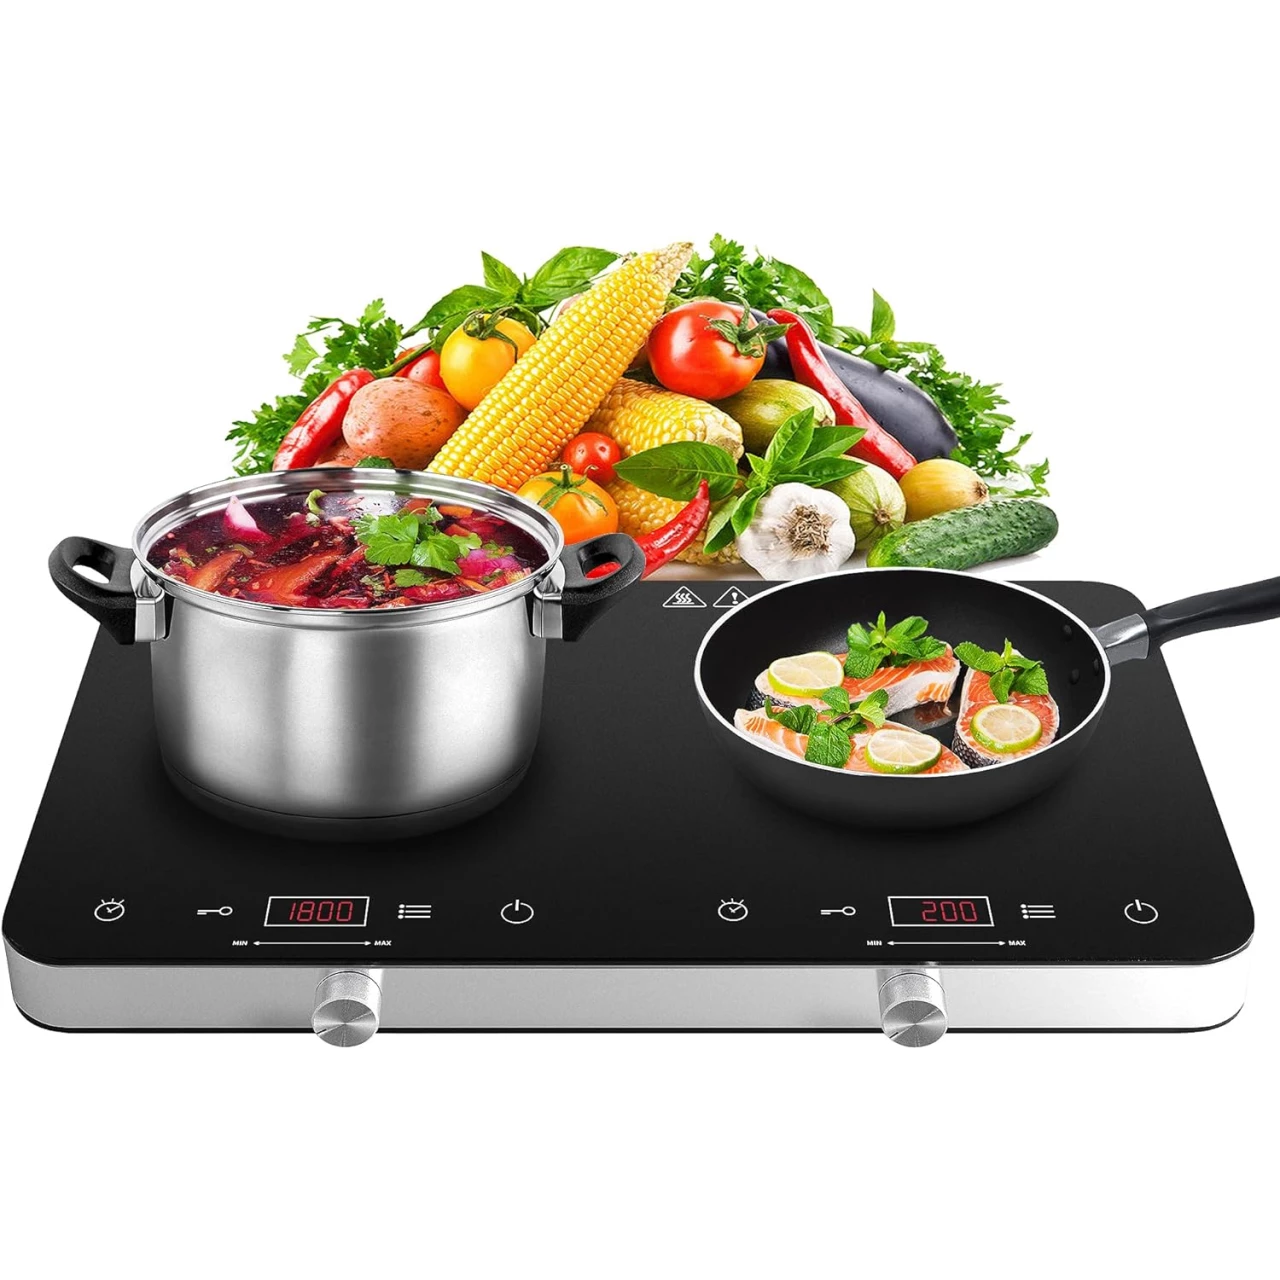 COOKTRON Double Induction Cooktop Burner, 1800w 2 burner Induction Cooker